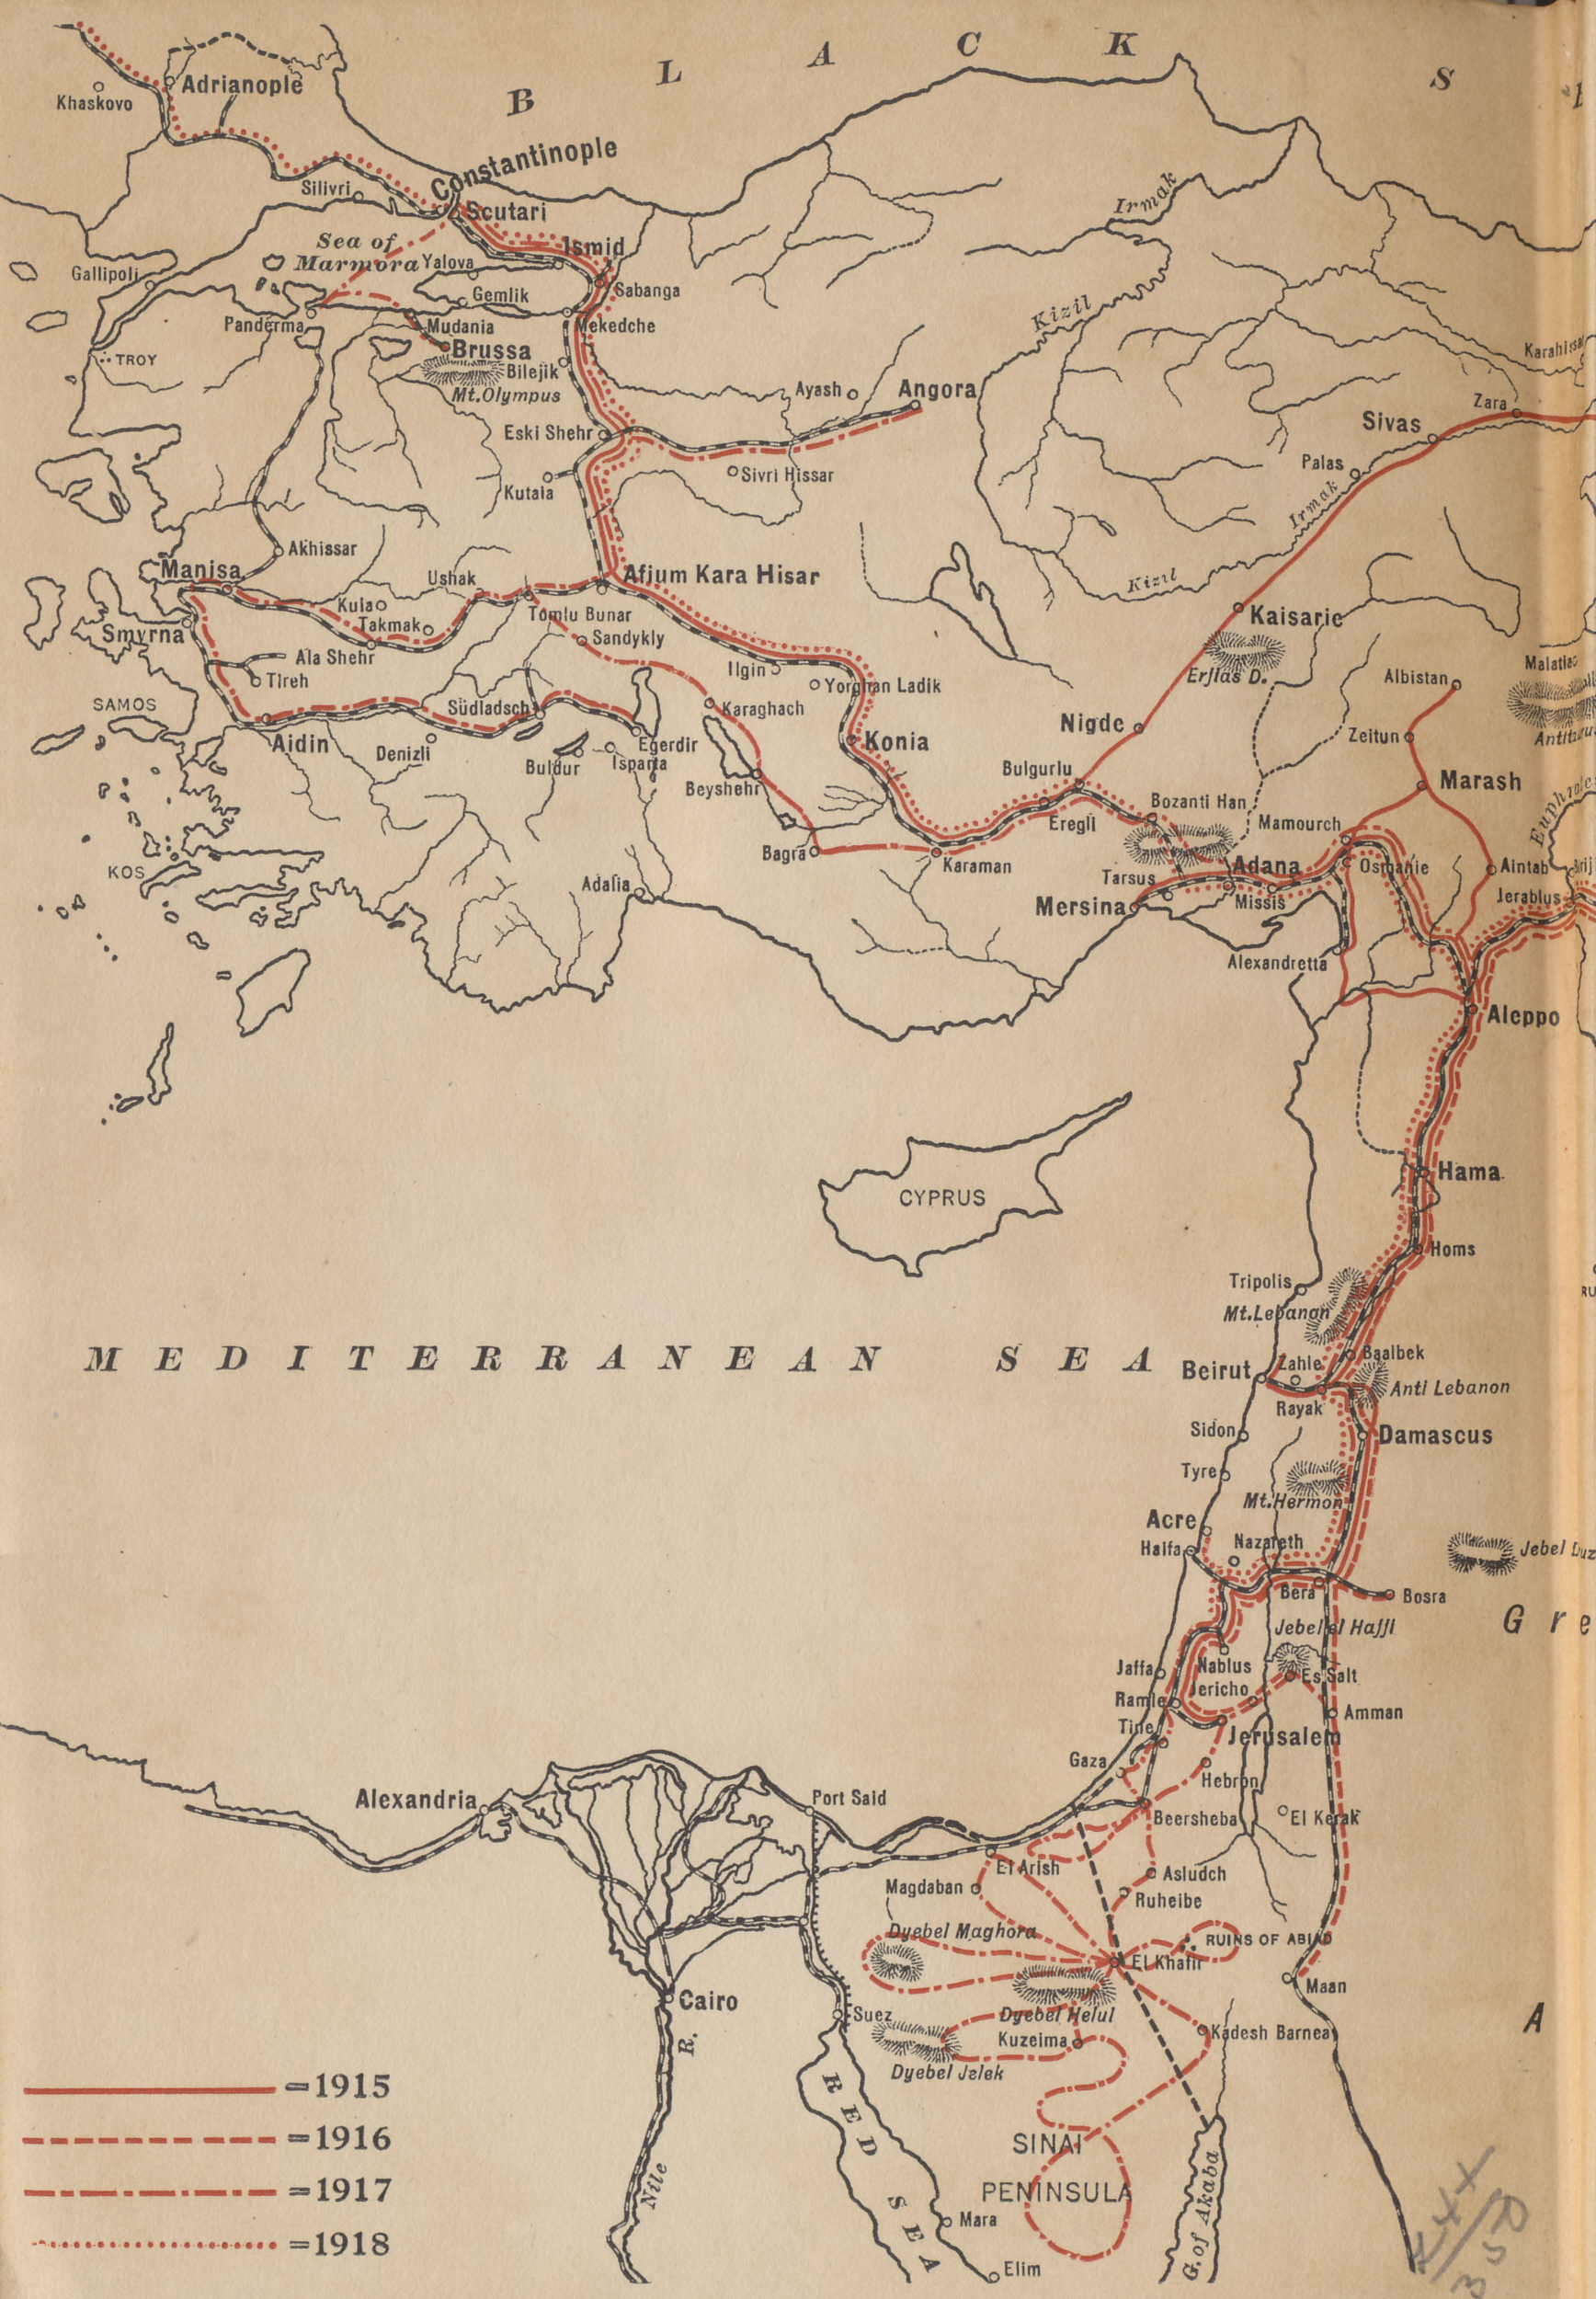 Western Ottoman Empire showing the travels of Rafael De Nogales, Inspector-General of the Turkish Forces in Armenia and Military Governor of Egyptian Sinai during the World War, from his book %i1%Four Years Beneath the Crescent%i0%.
Text:
Legend for the author's travels for the years 1915, 1916, 1917, and 1918.